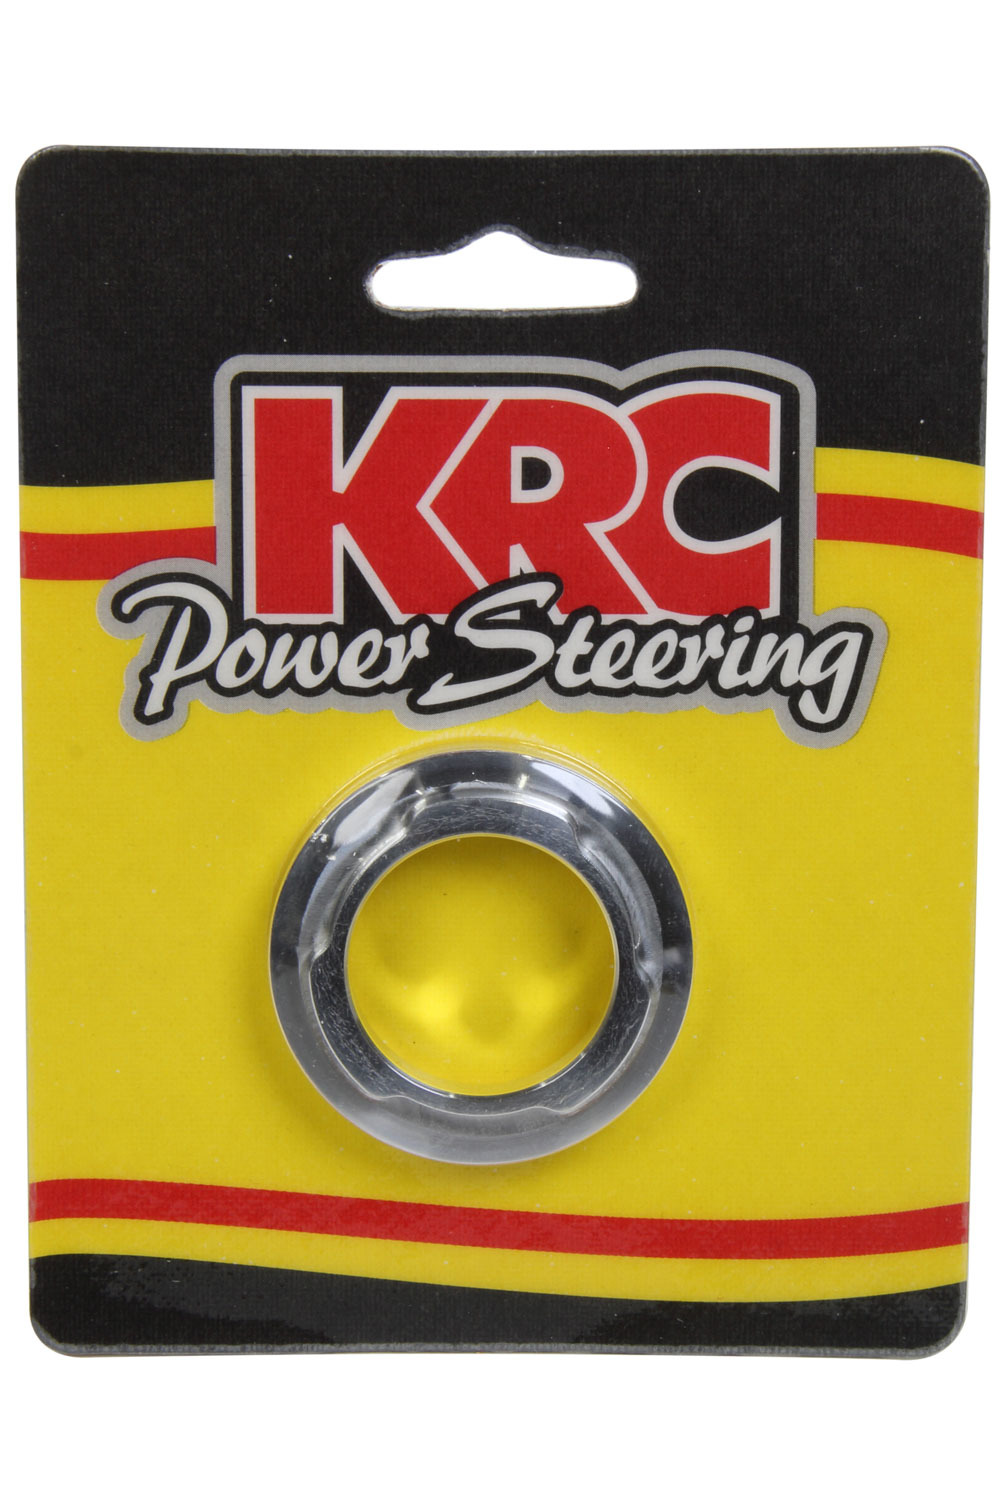 KRC Power Steering 38215250 Crank Mandrel Spacer, R-Lok, 0.250 in Thick, Aluminum, Natural, KRC R-Lok Pulley Drive System, Chevy V8, Each